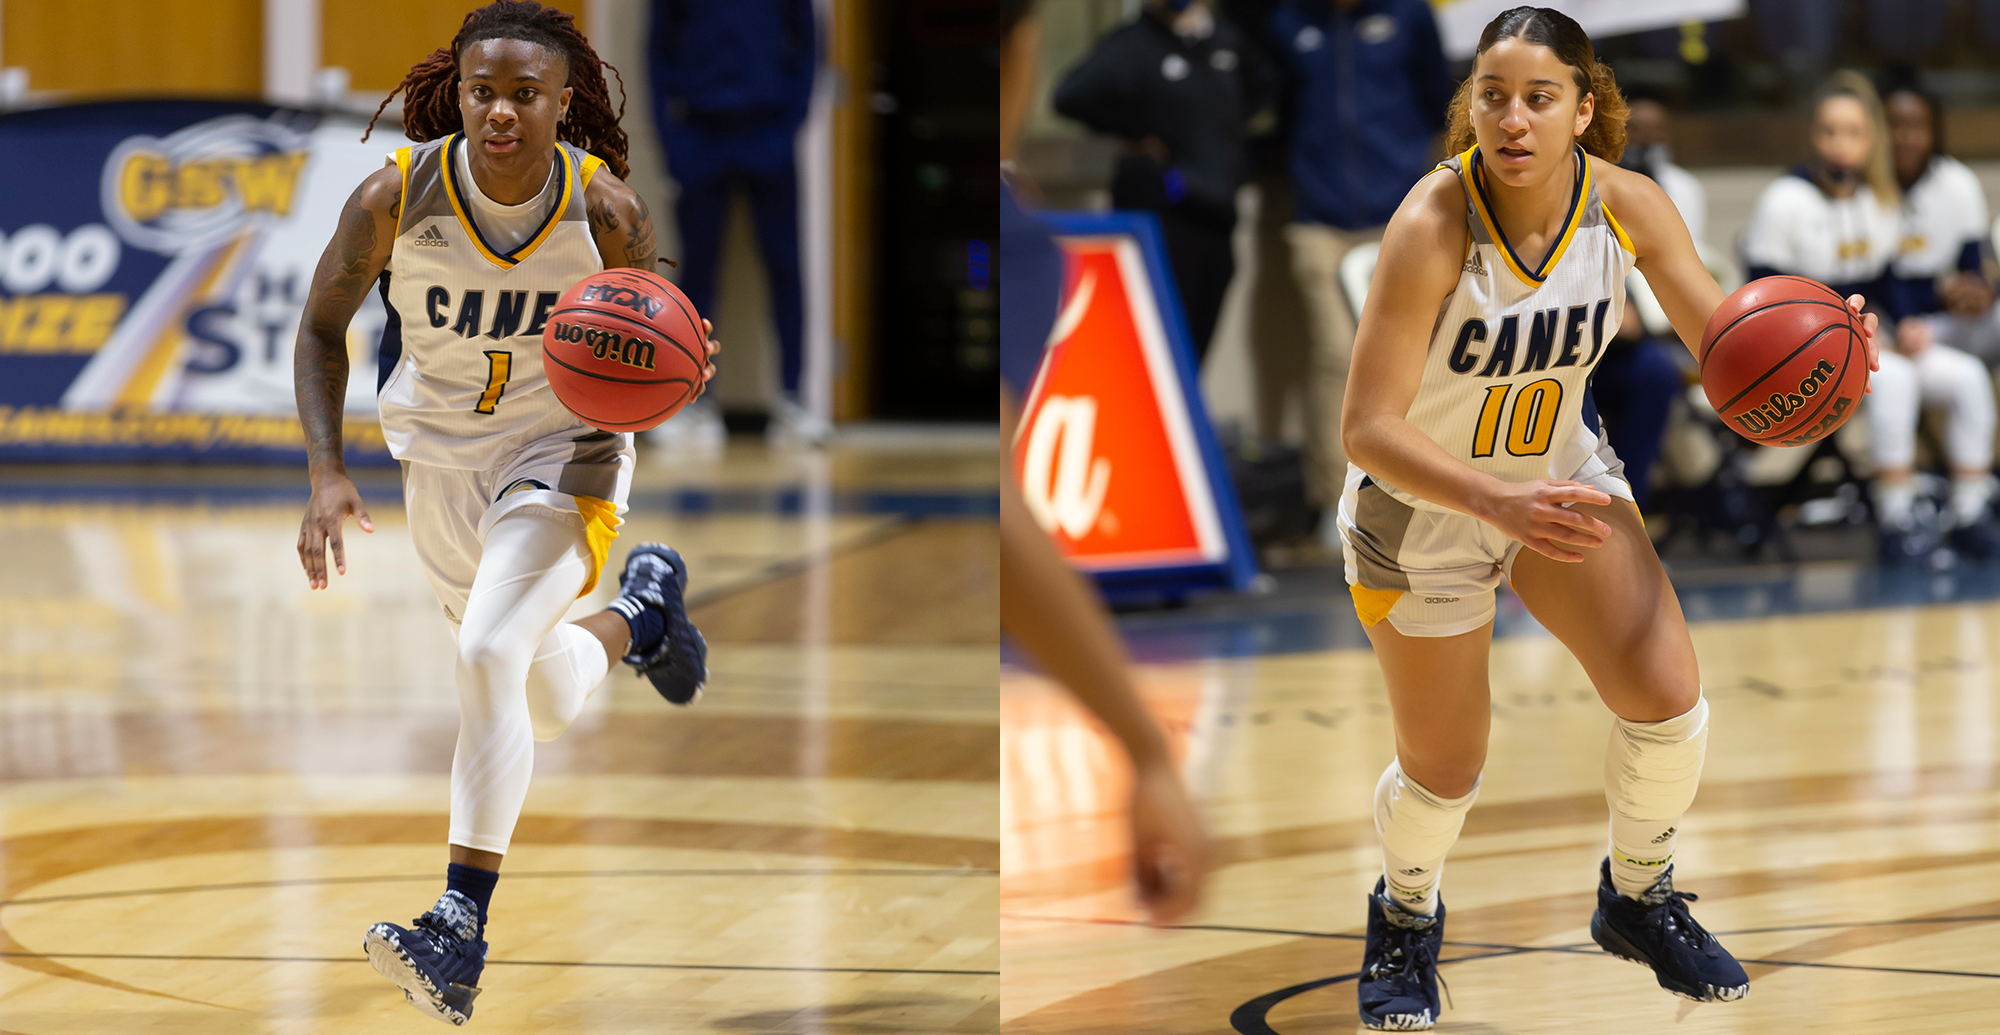 Chatman, Storr Named to Peach Belt All-Conference Team